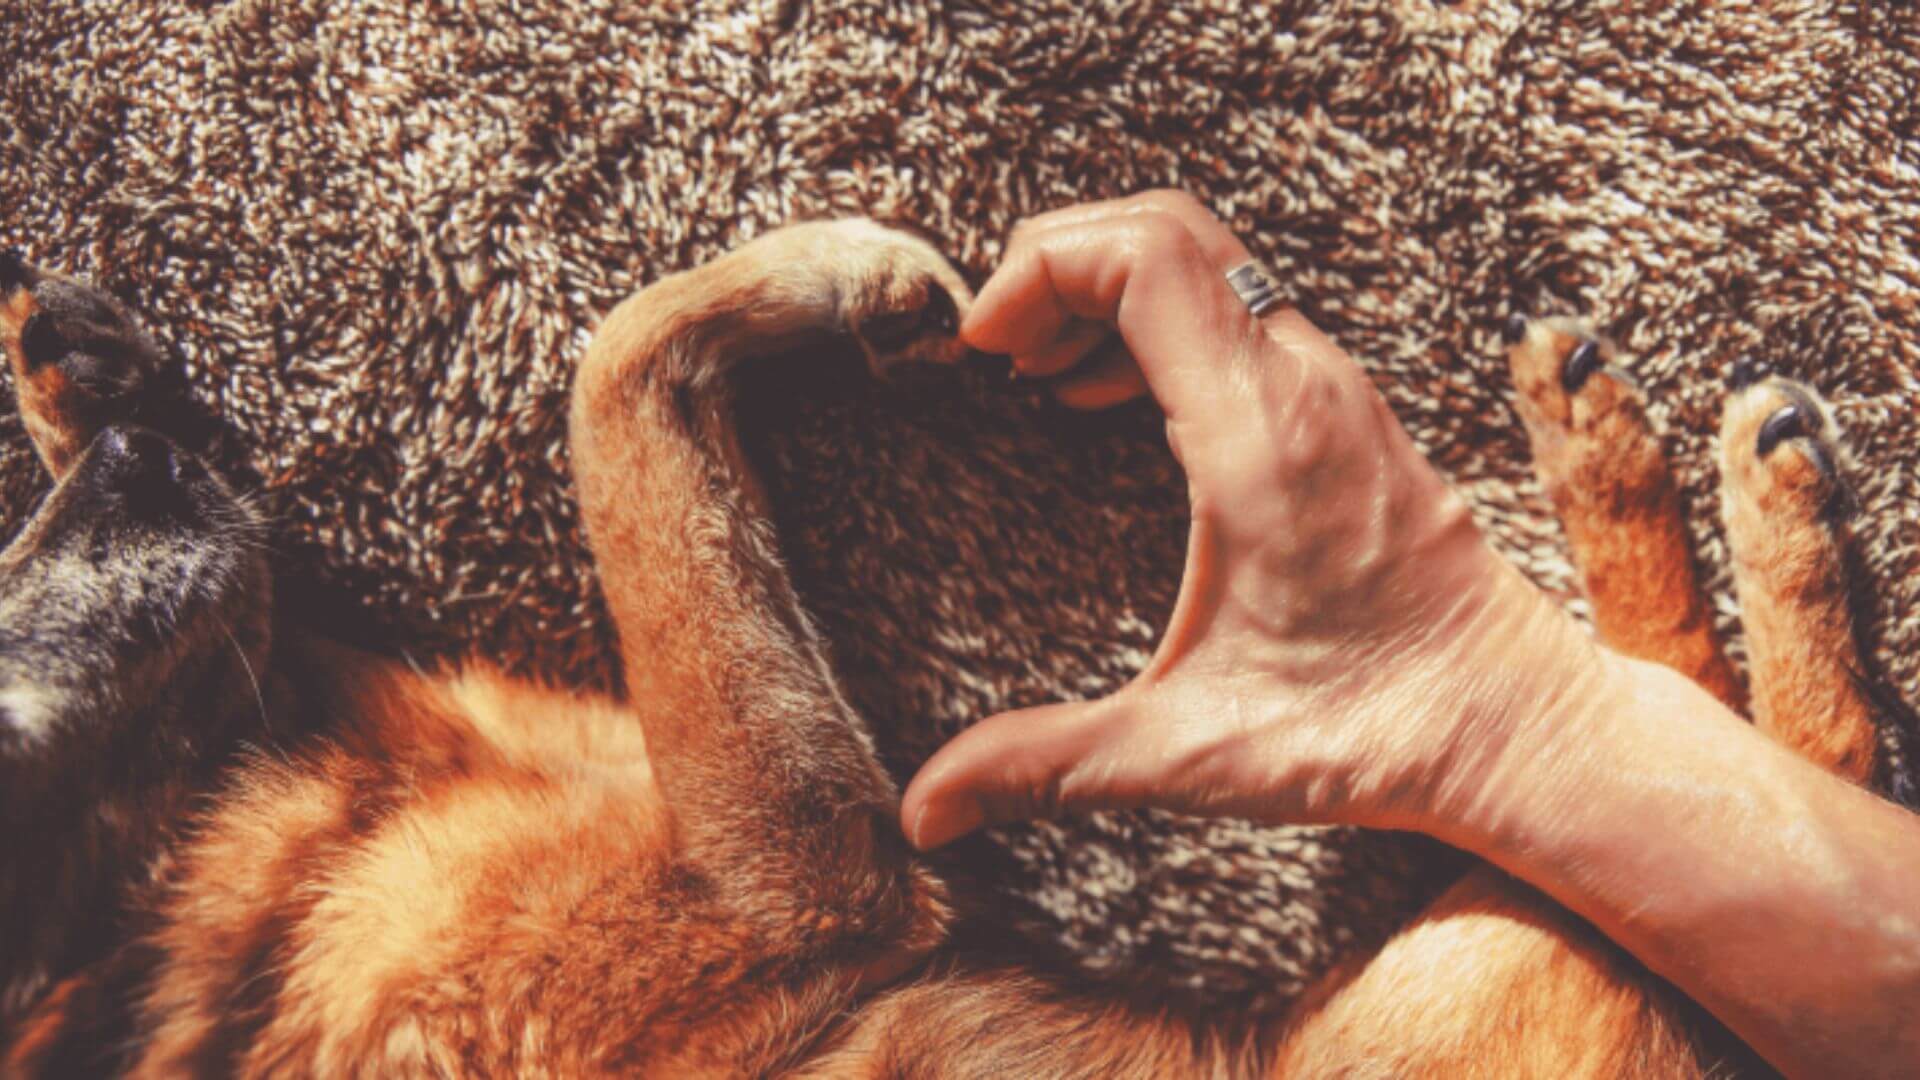 Hand gently touching dog's paw, showing love and connection between human and pet